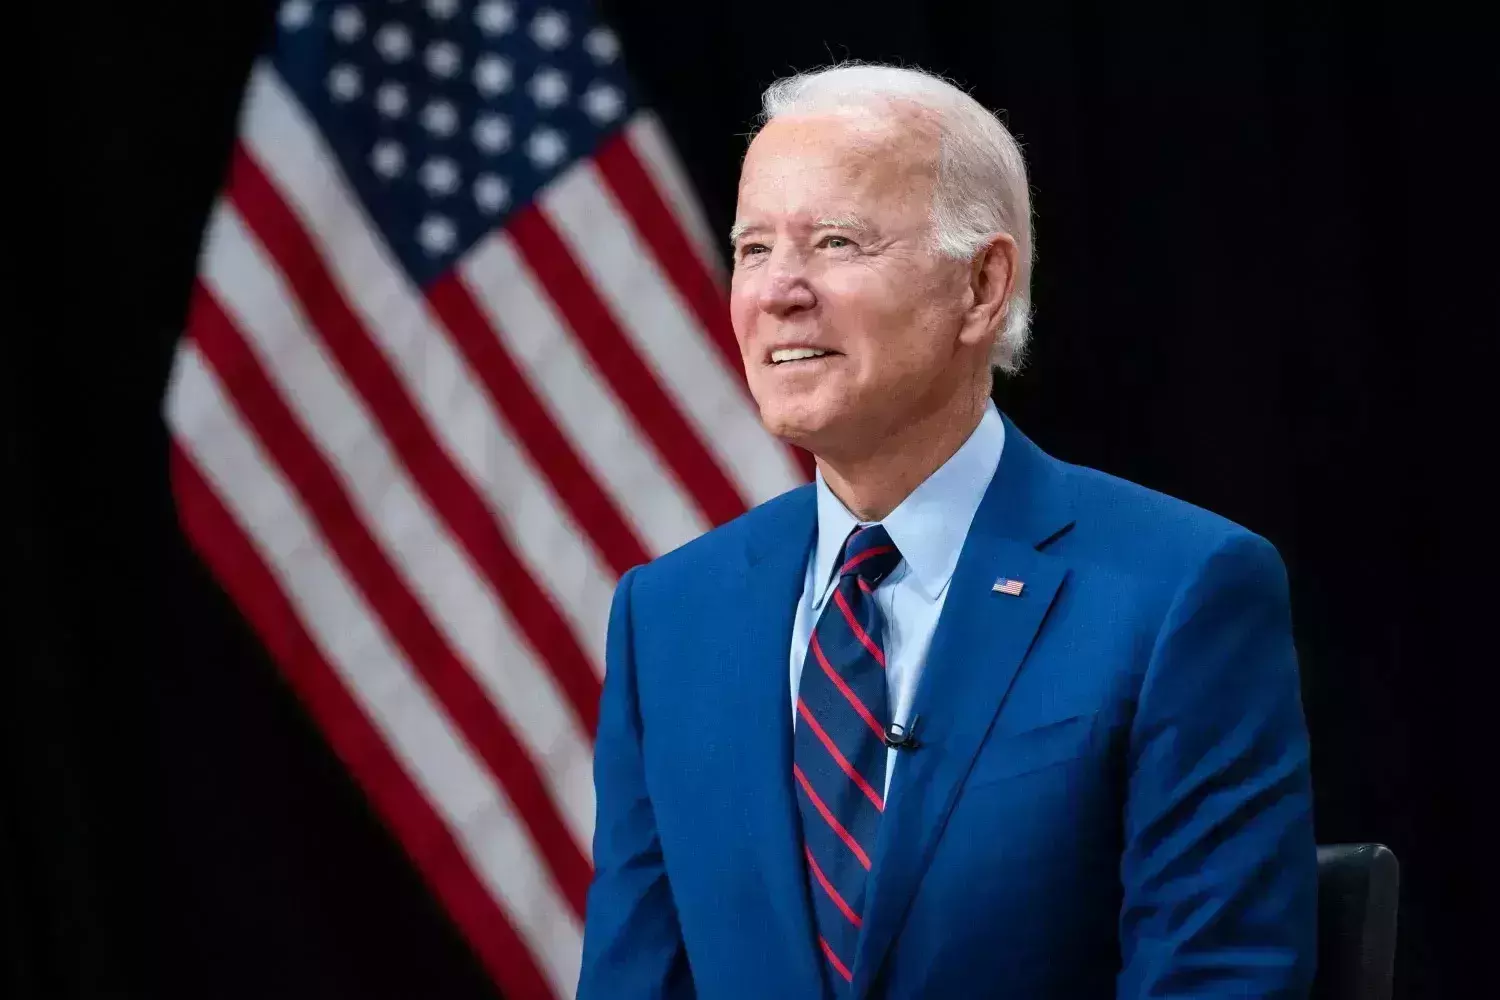 Biden evacuated as a plane entered a restricted airspace